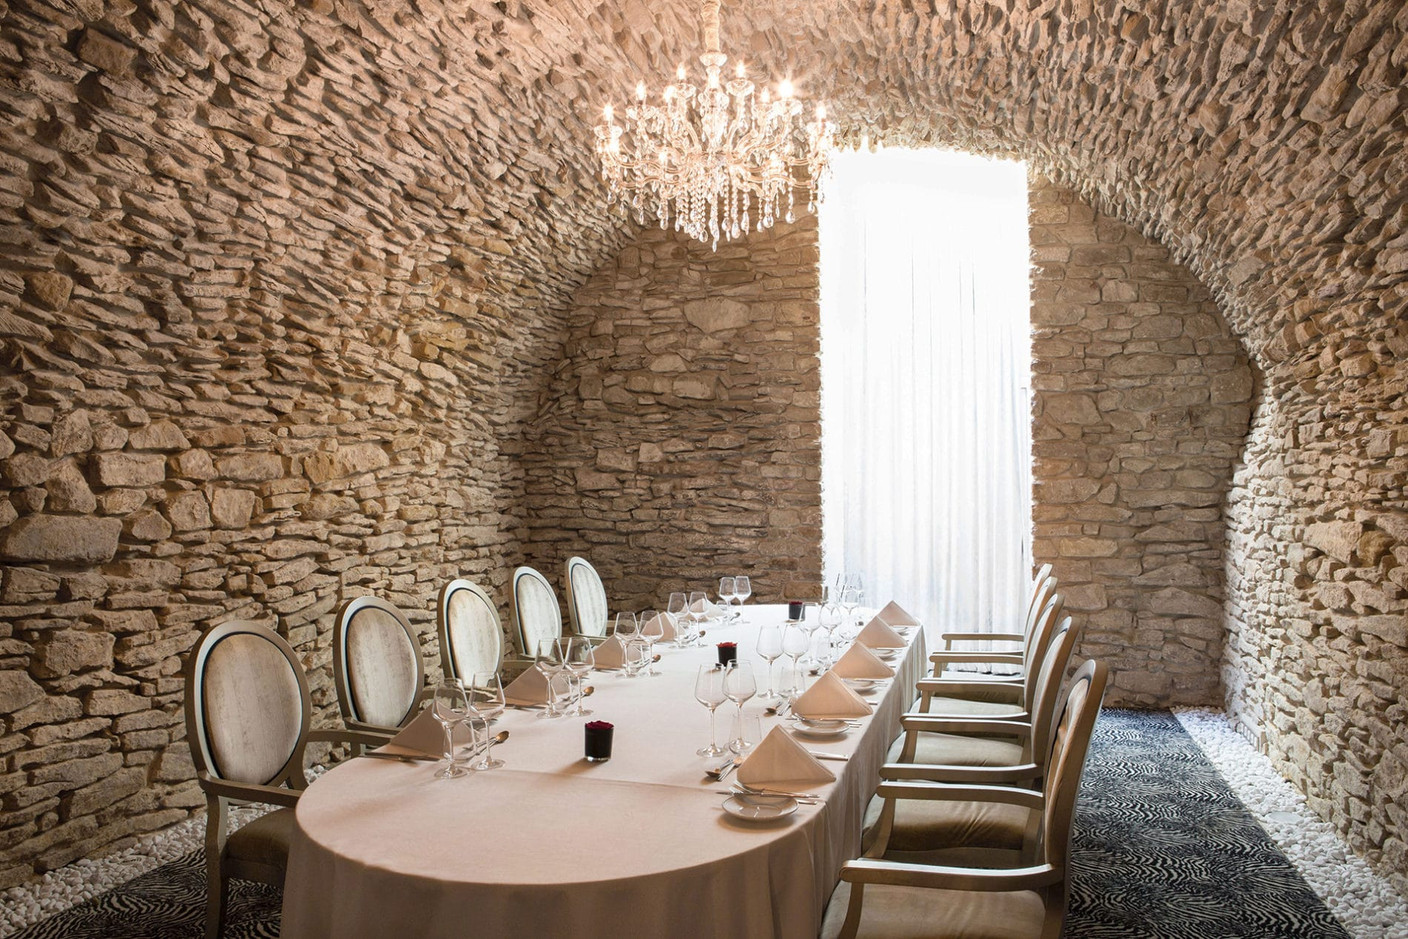 The Vauban lounge and its incredible stone walls. Photo: Le Place d'Armes